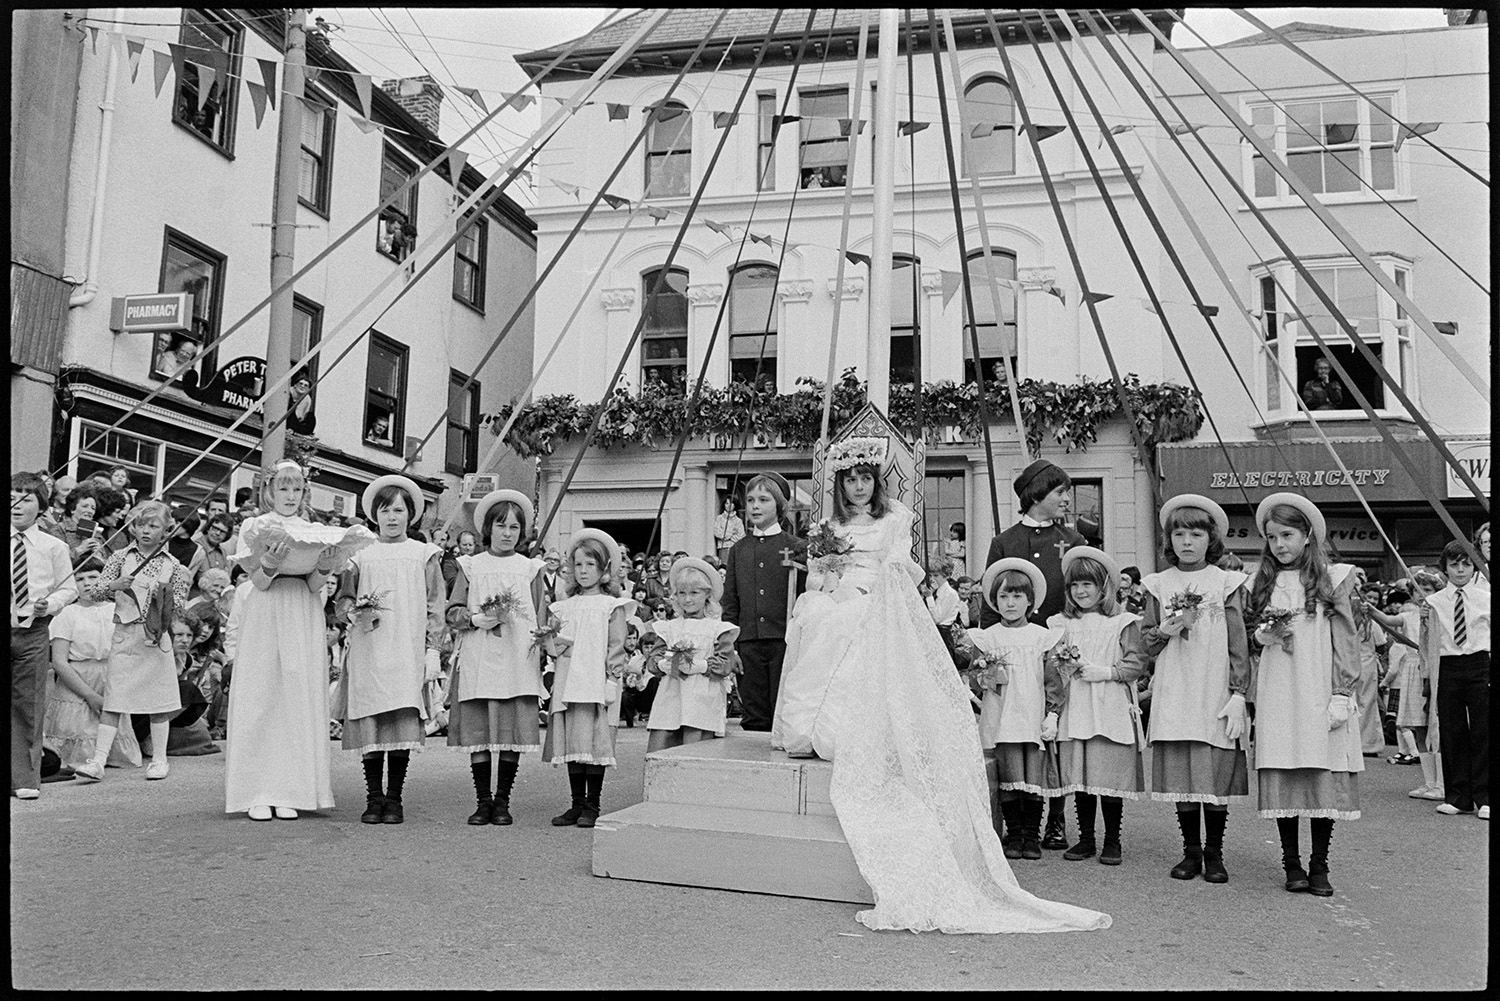 May Queen and Crowner processing to maypole, posing for photographers. 
[The May Queen and her attendants posing by the maypole at Torrington Mayfair for photographs. The May Queen has been crowned and is sitting on a throne. Tonya Copp is holding the cushion which the crown was presented on. Various buildings can be seen in the background, including an electrical shop and a pharmacy.]